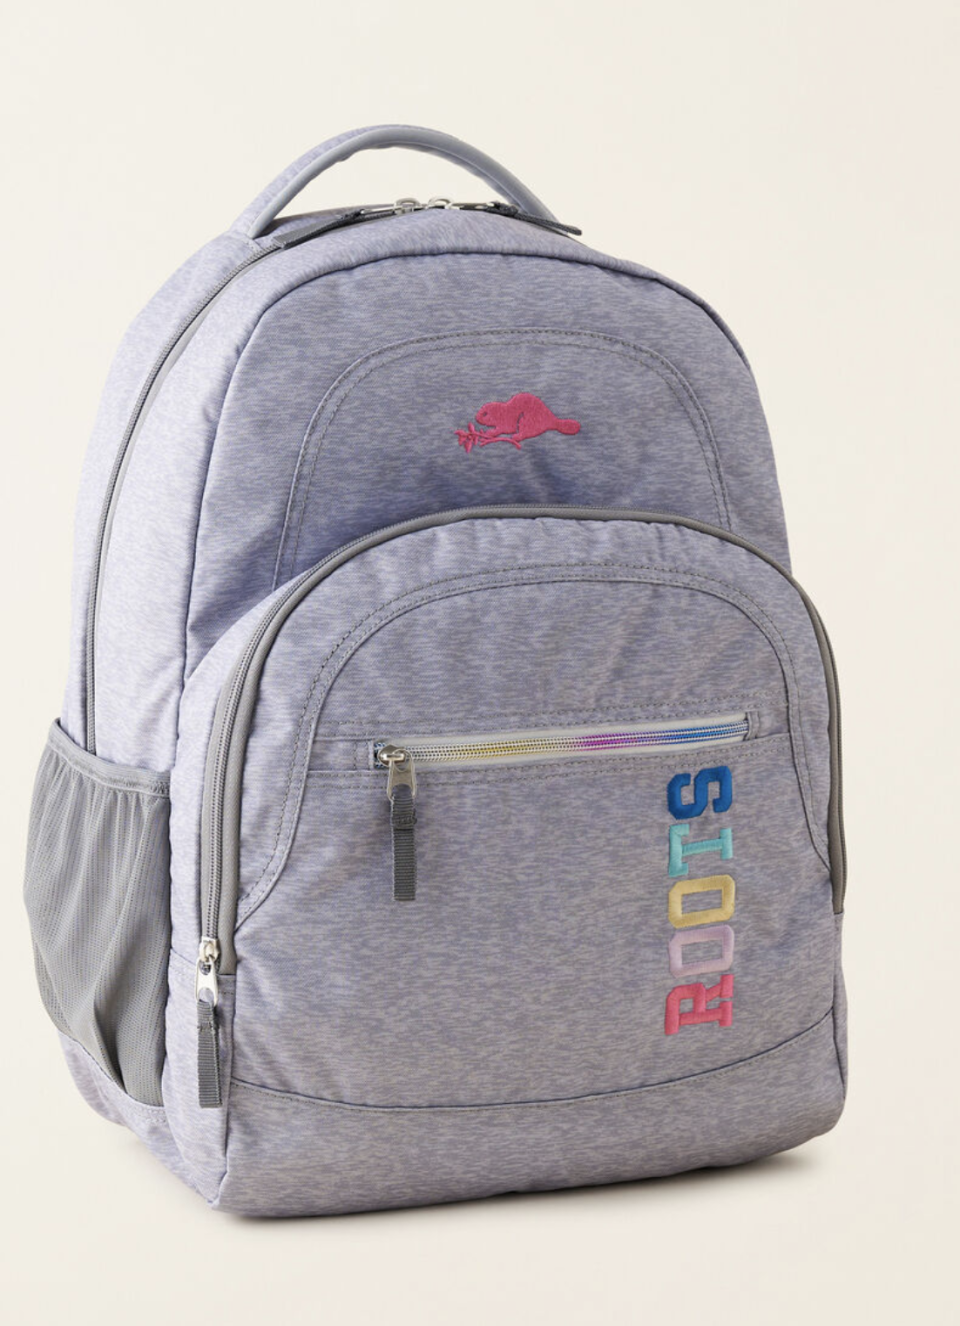 Kids Roots Backpack in light grey and purple with roots logo (photo via Roots)